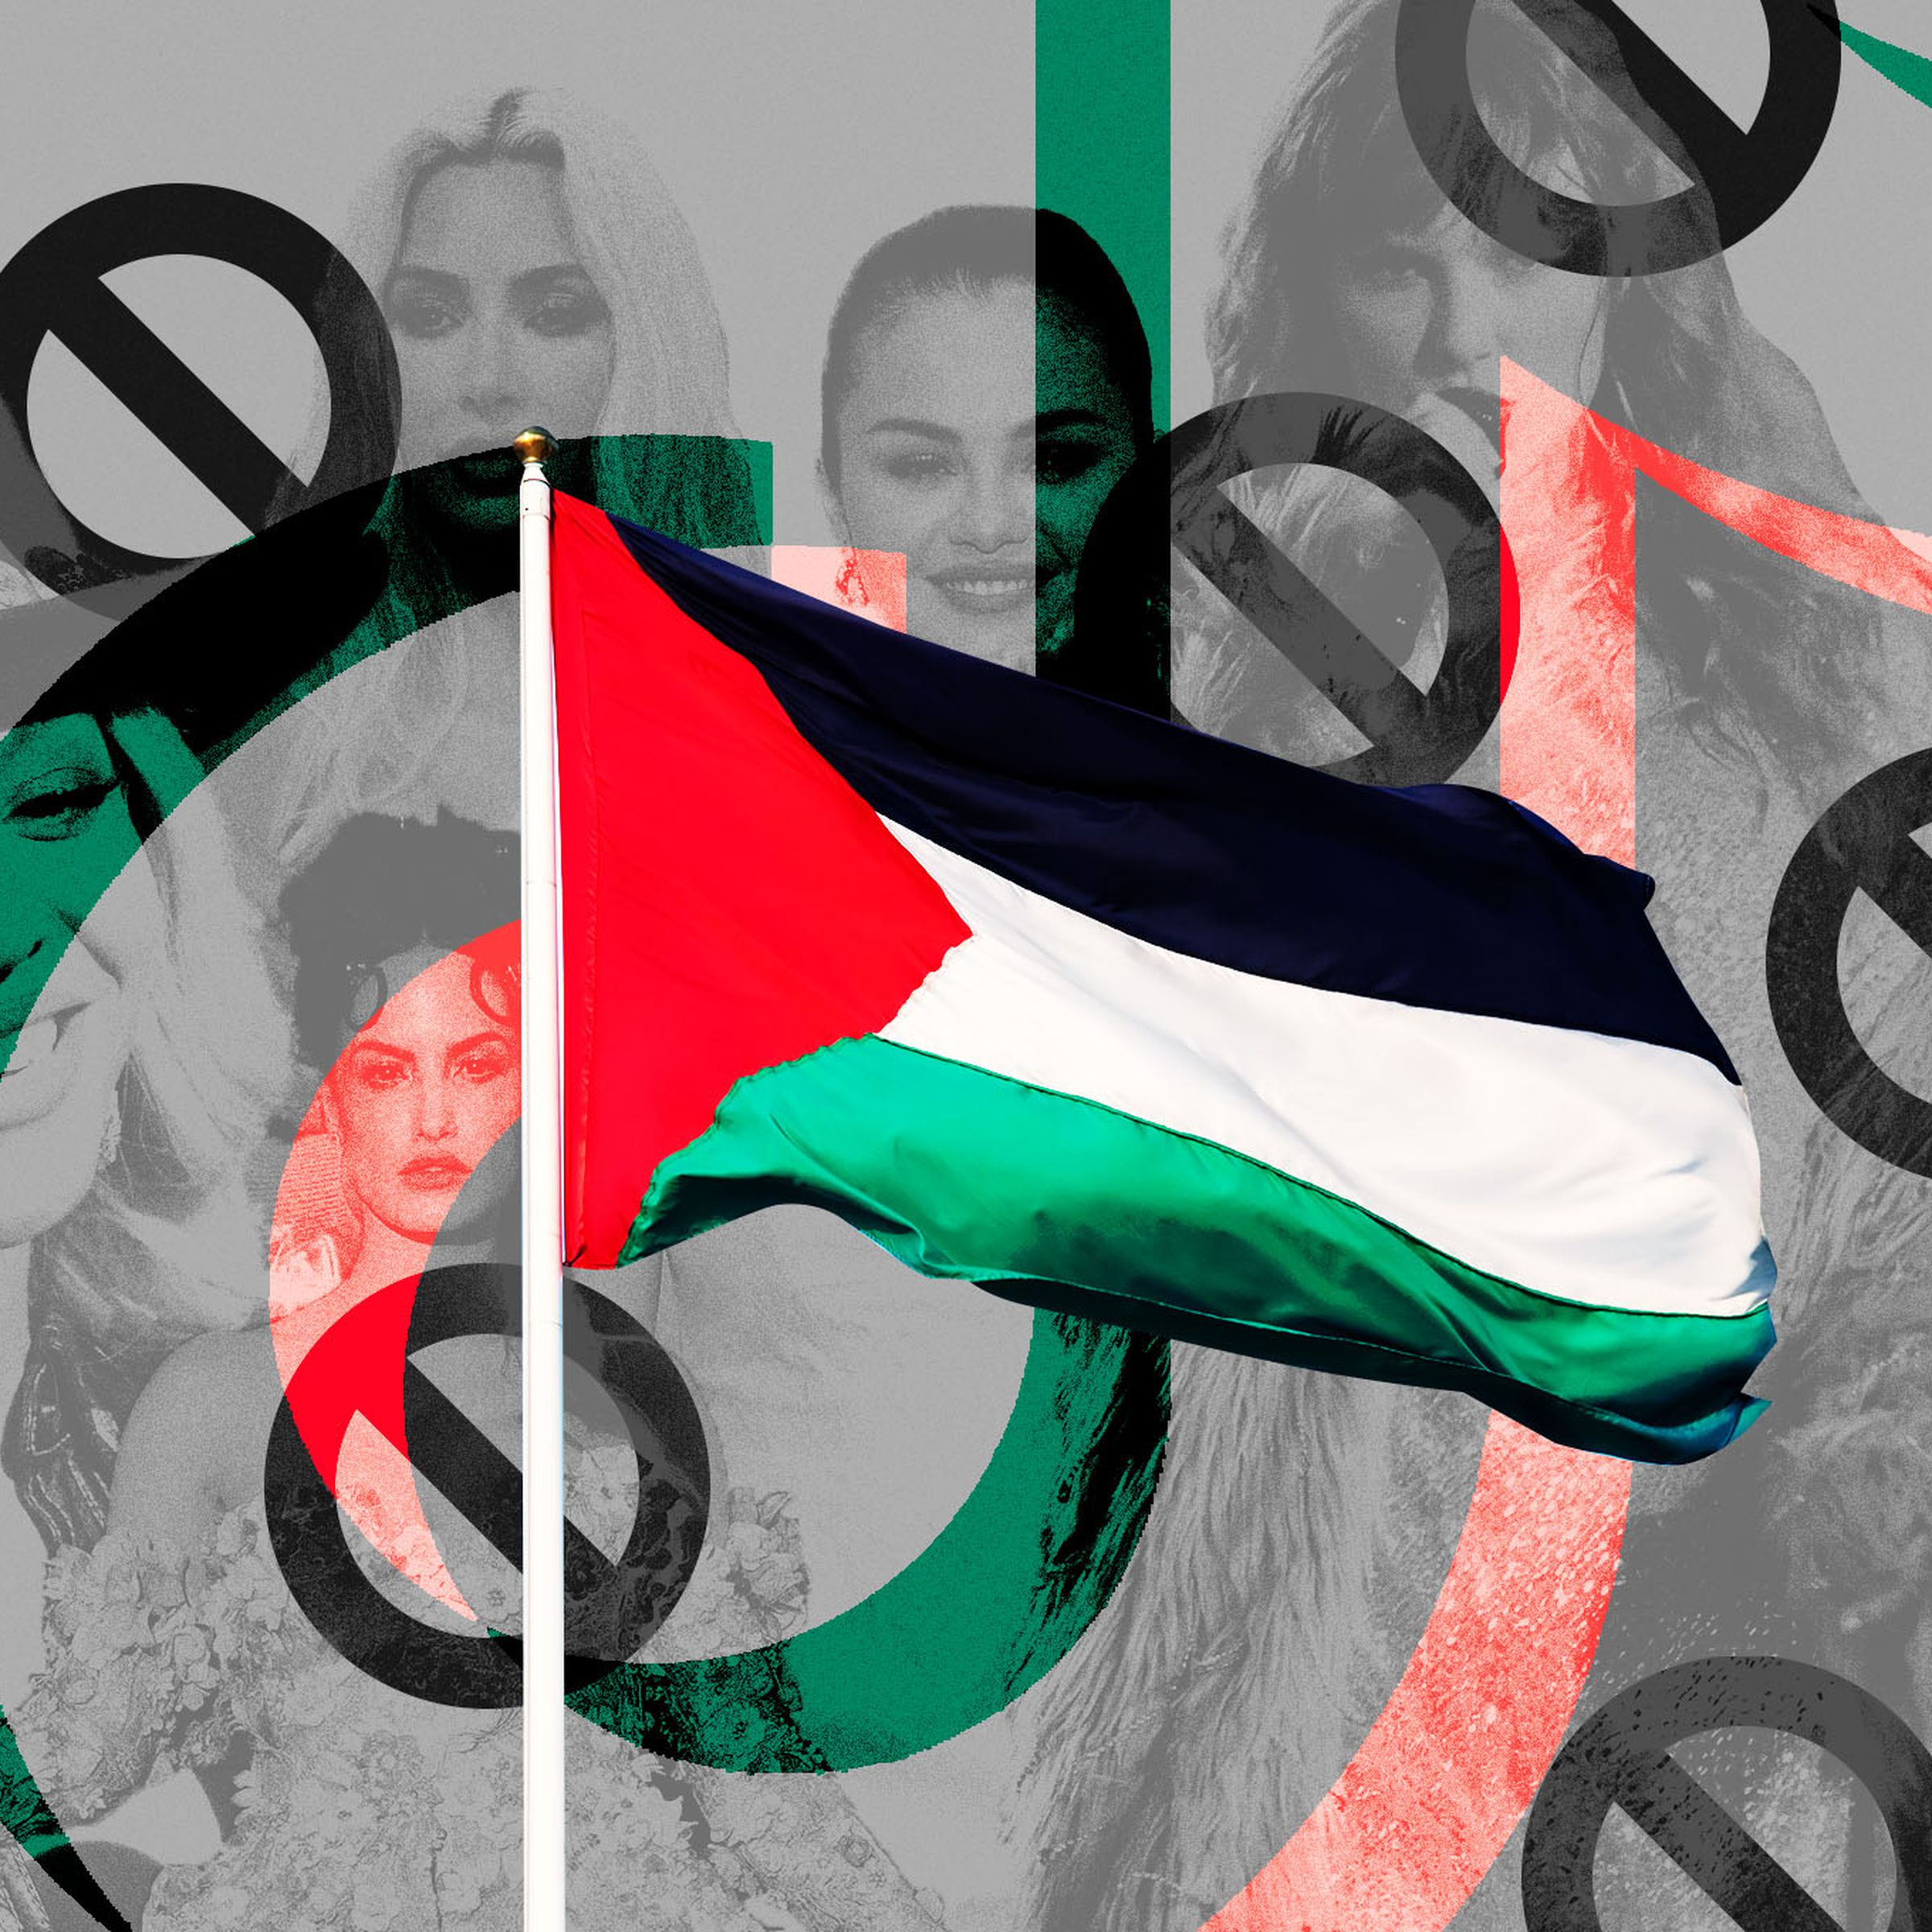 Photo collage of a Palestinian flag in front of a background of celebrity faces and block symbols.